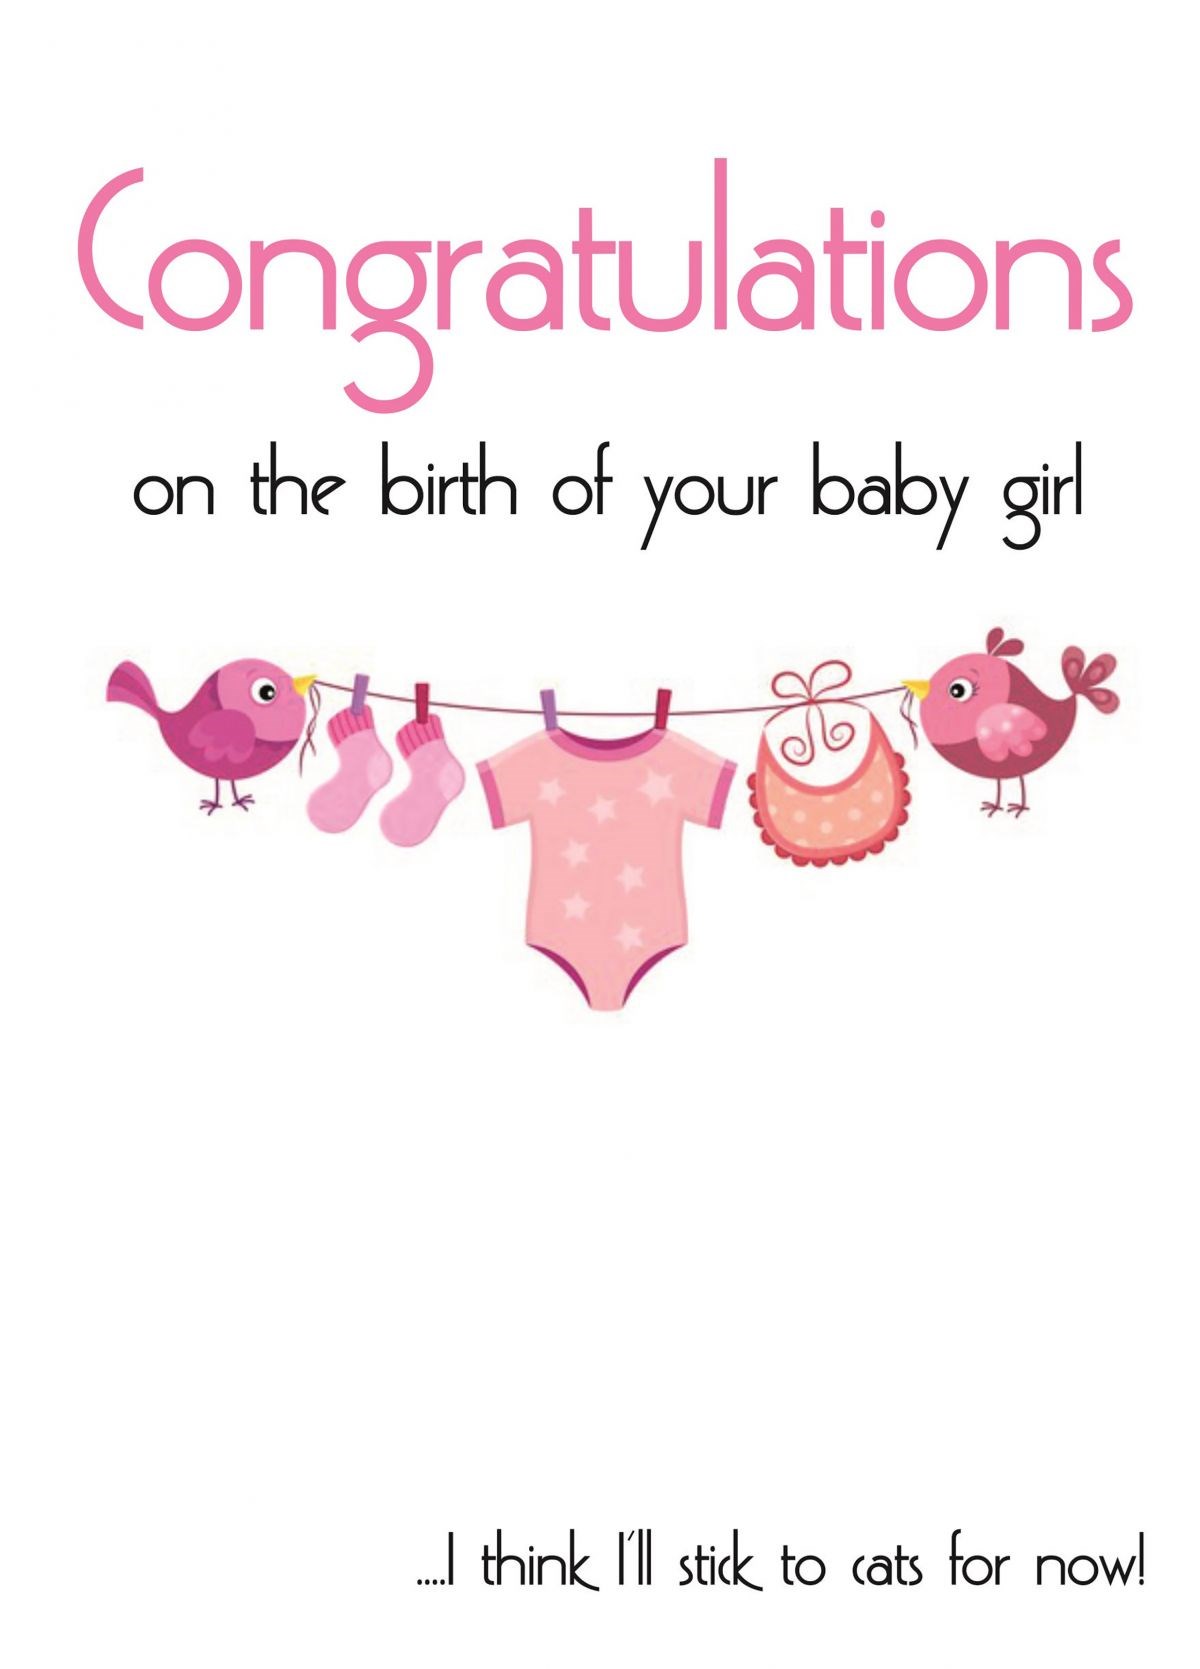 On new baby your congratulations 25 ‘Congrats